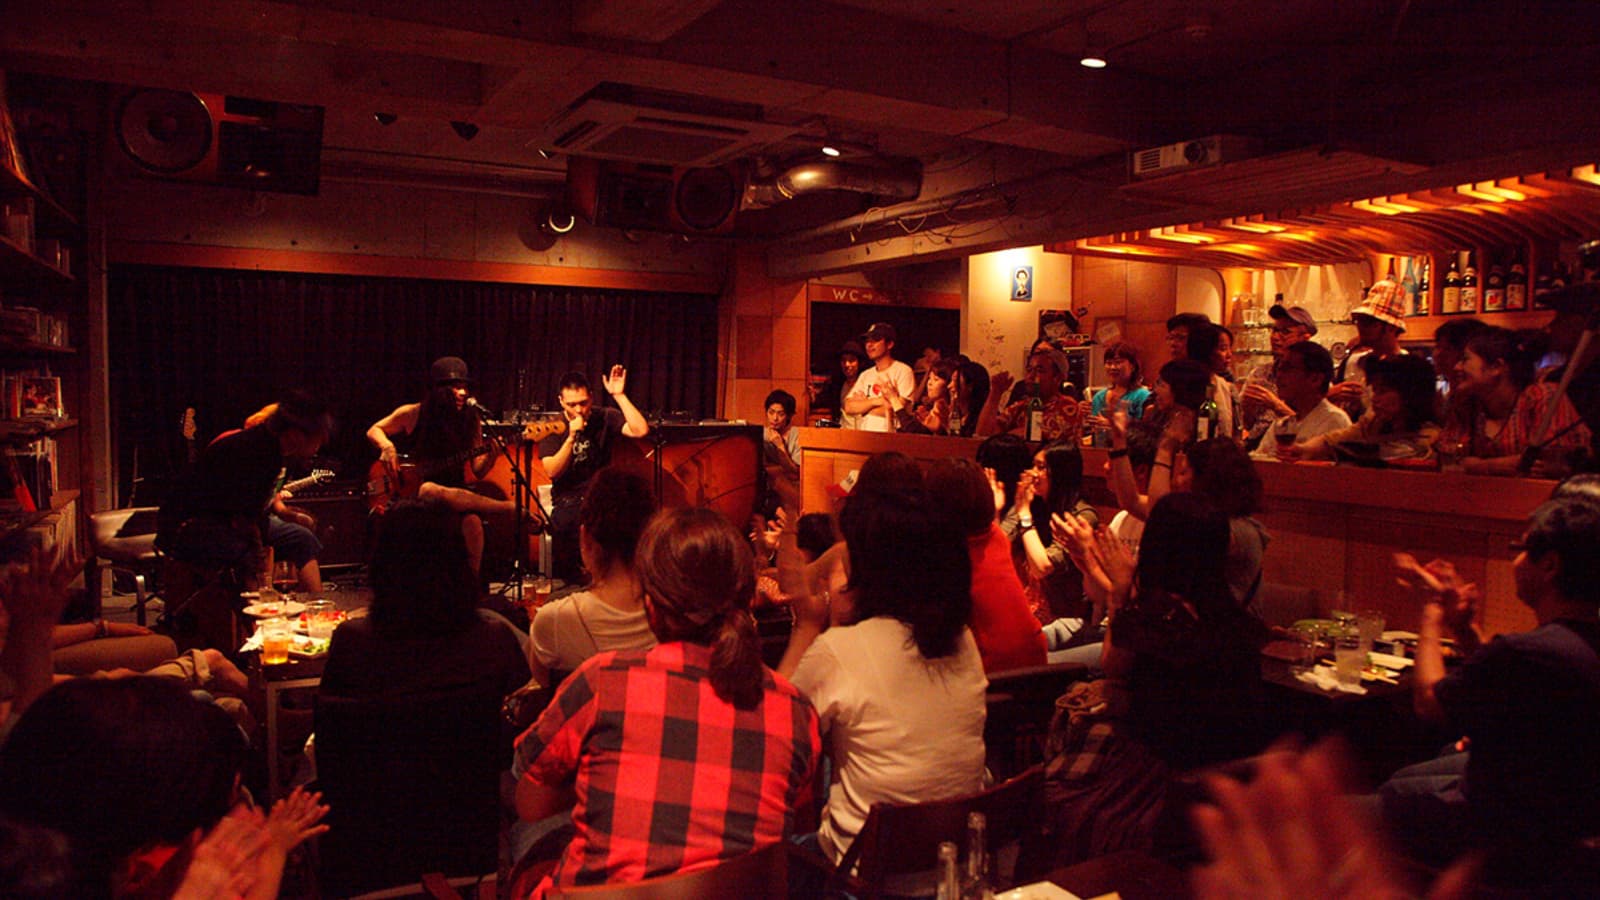 Music Bar RPM, a small bar and music club in Shimokitazawa, with great live music including jazz.